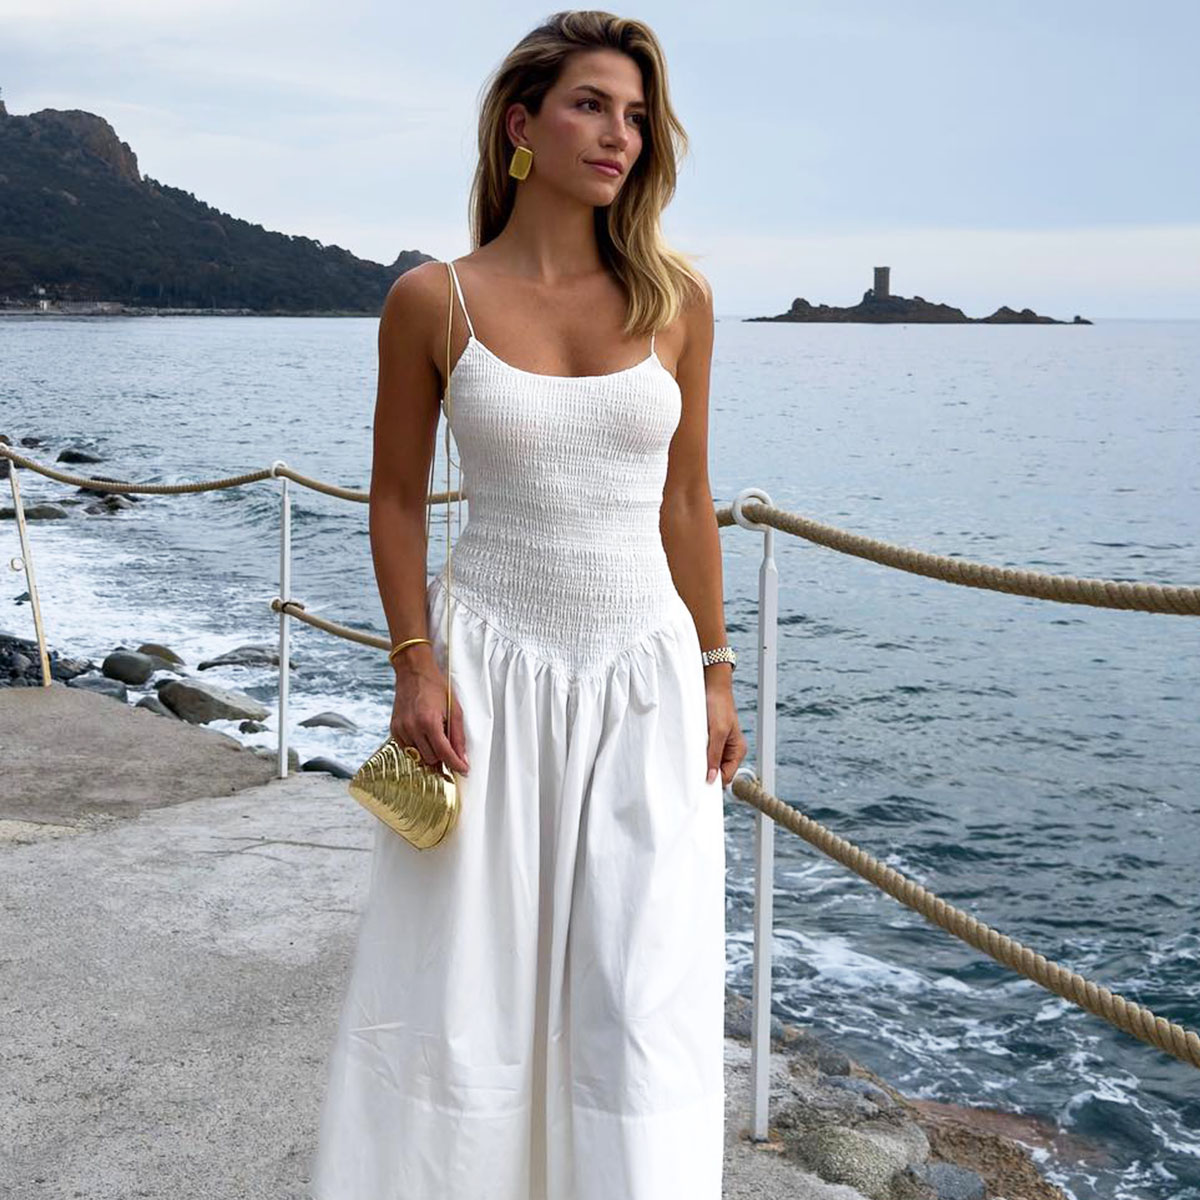 Out From Under See Me Later Sheer Slip Dress In White,at Urban